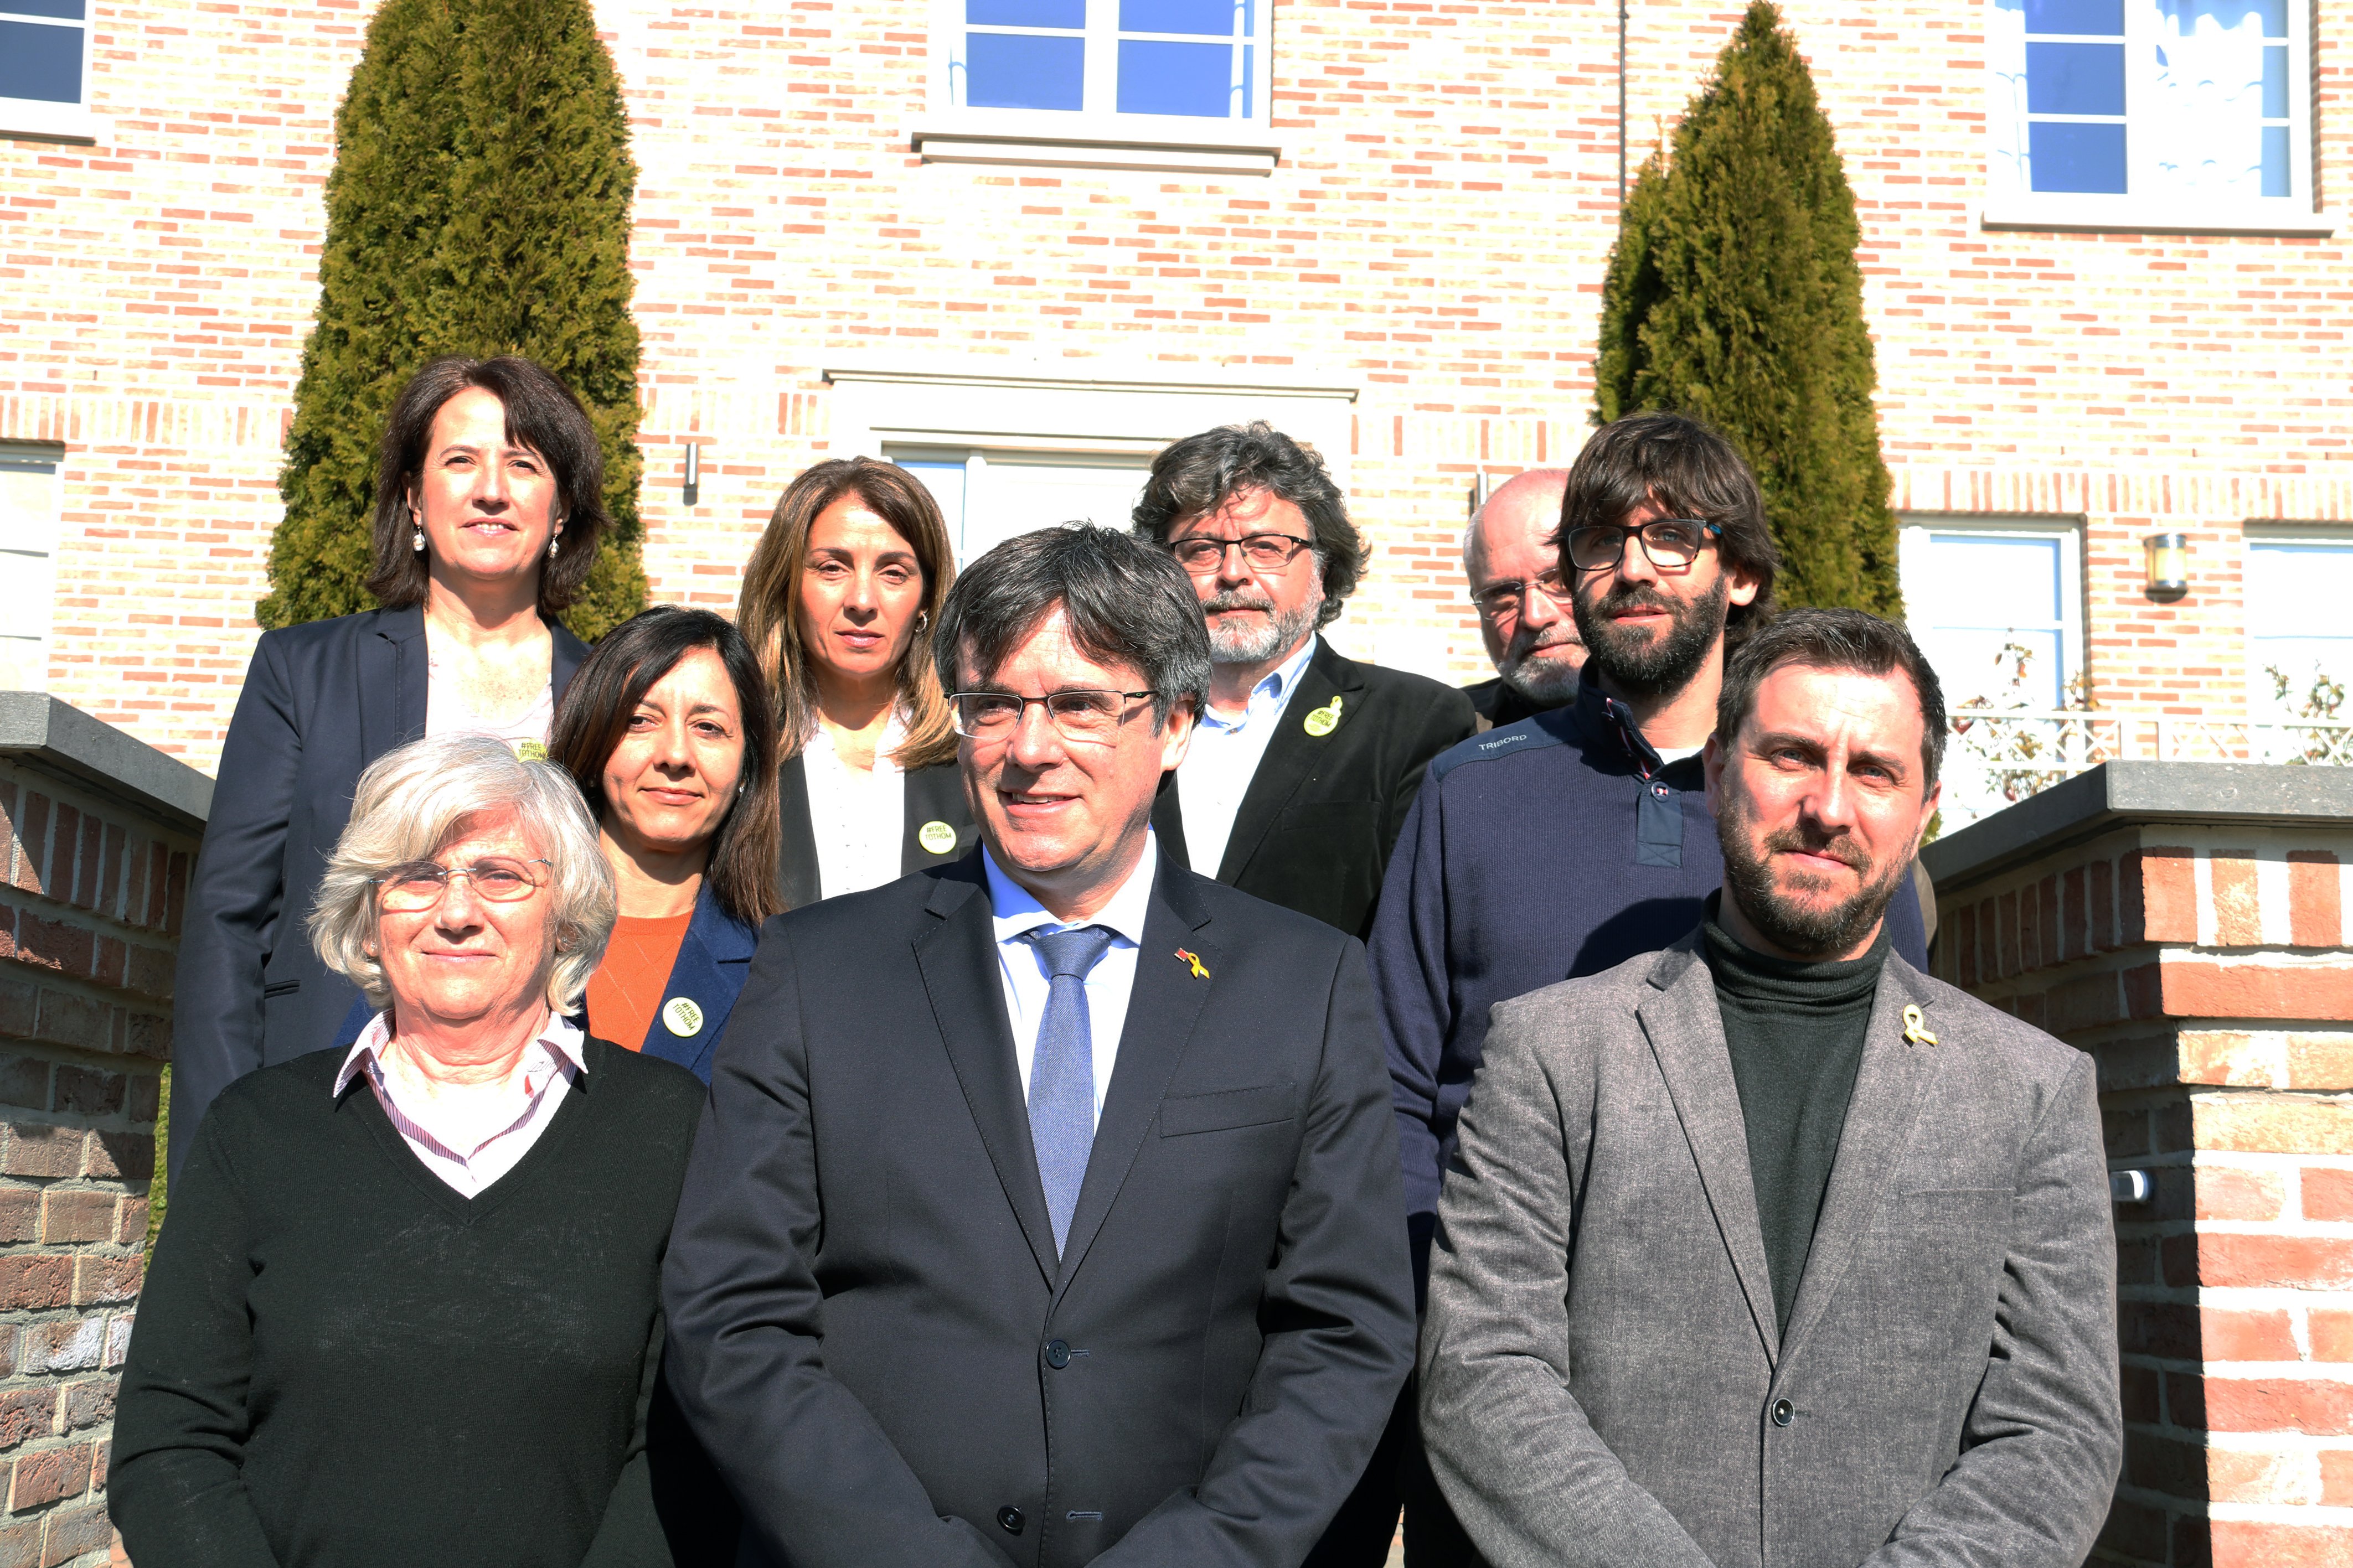 Catalan exile body to present a strategic proposal "to culminate independence"